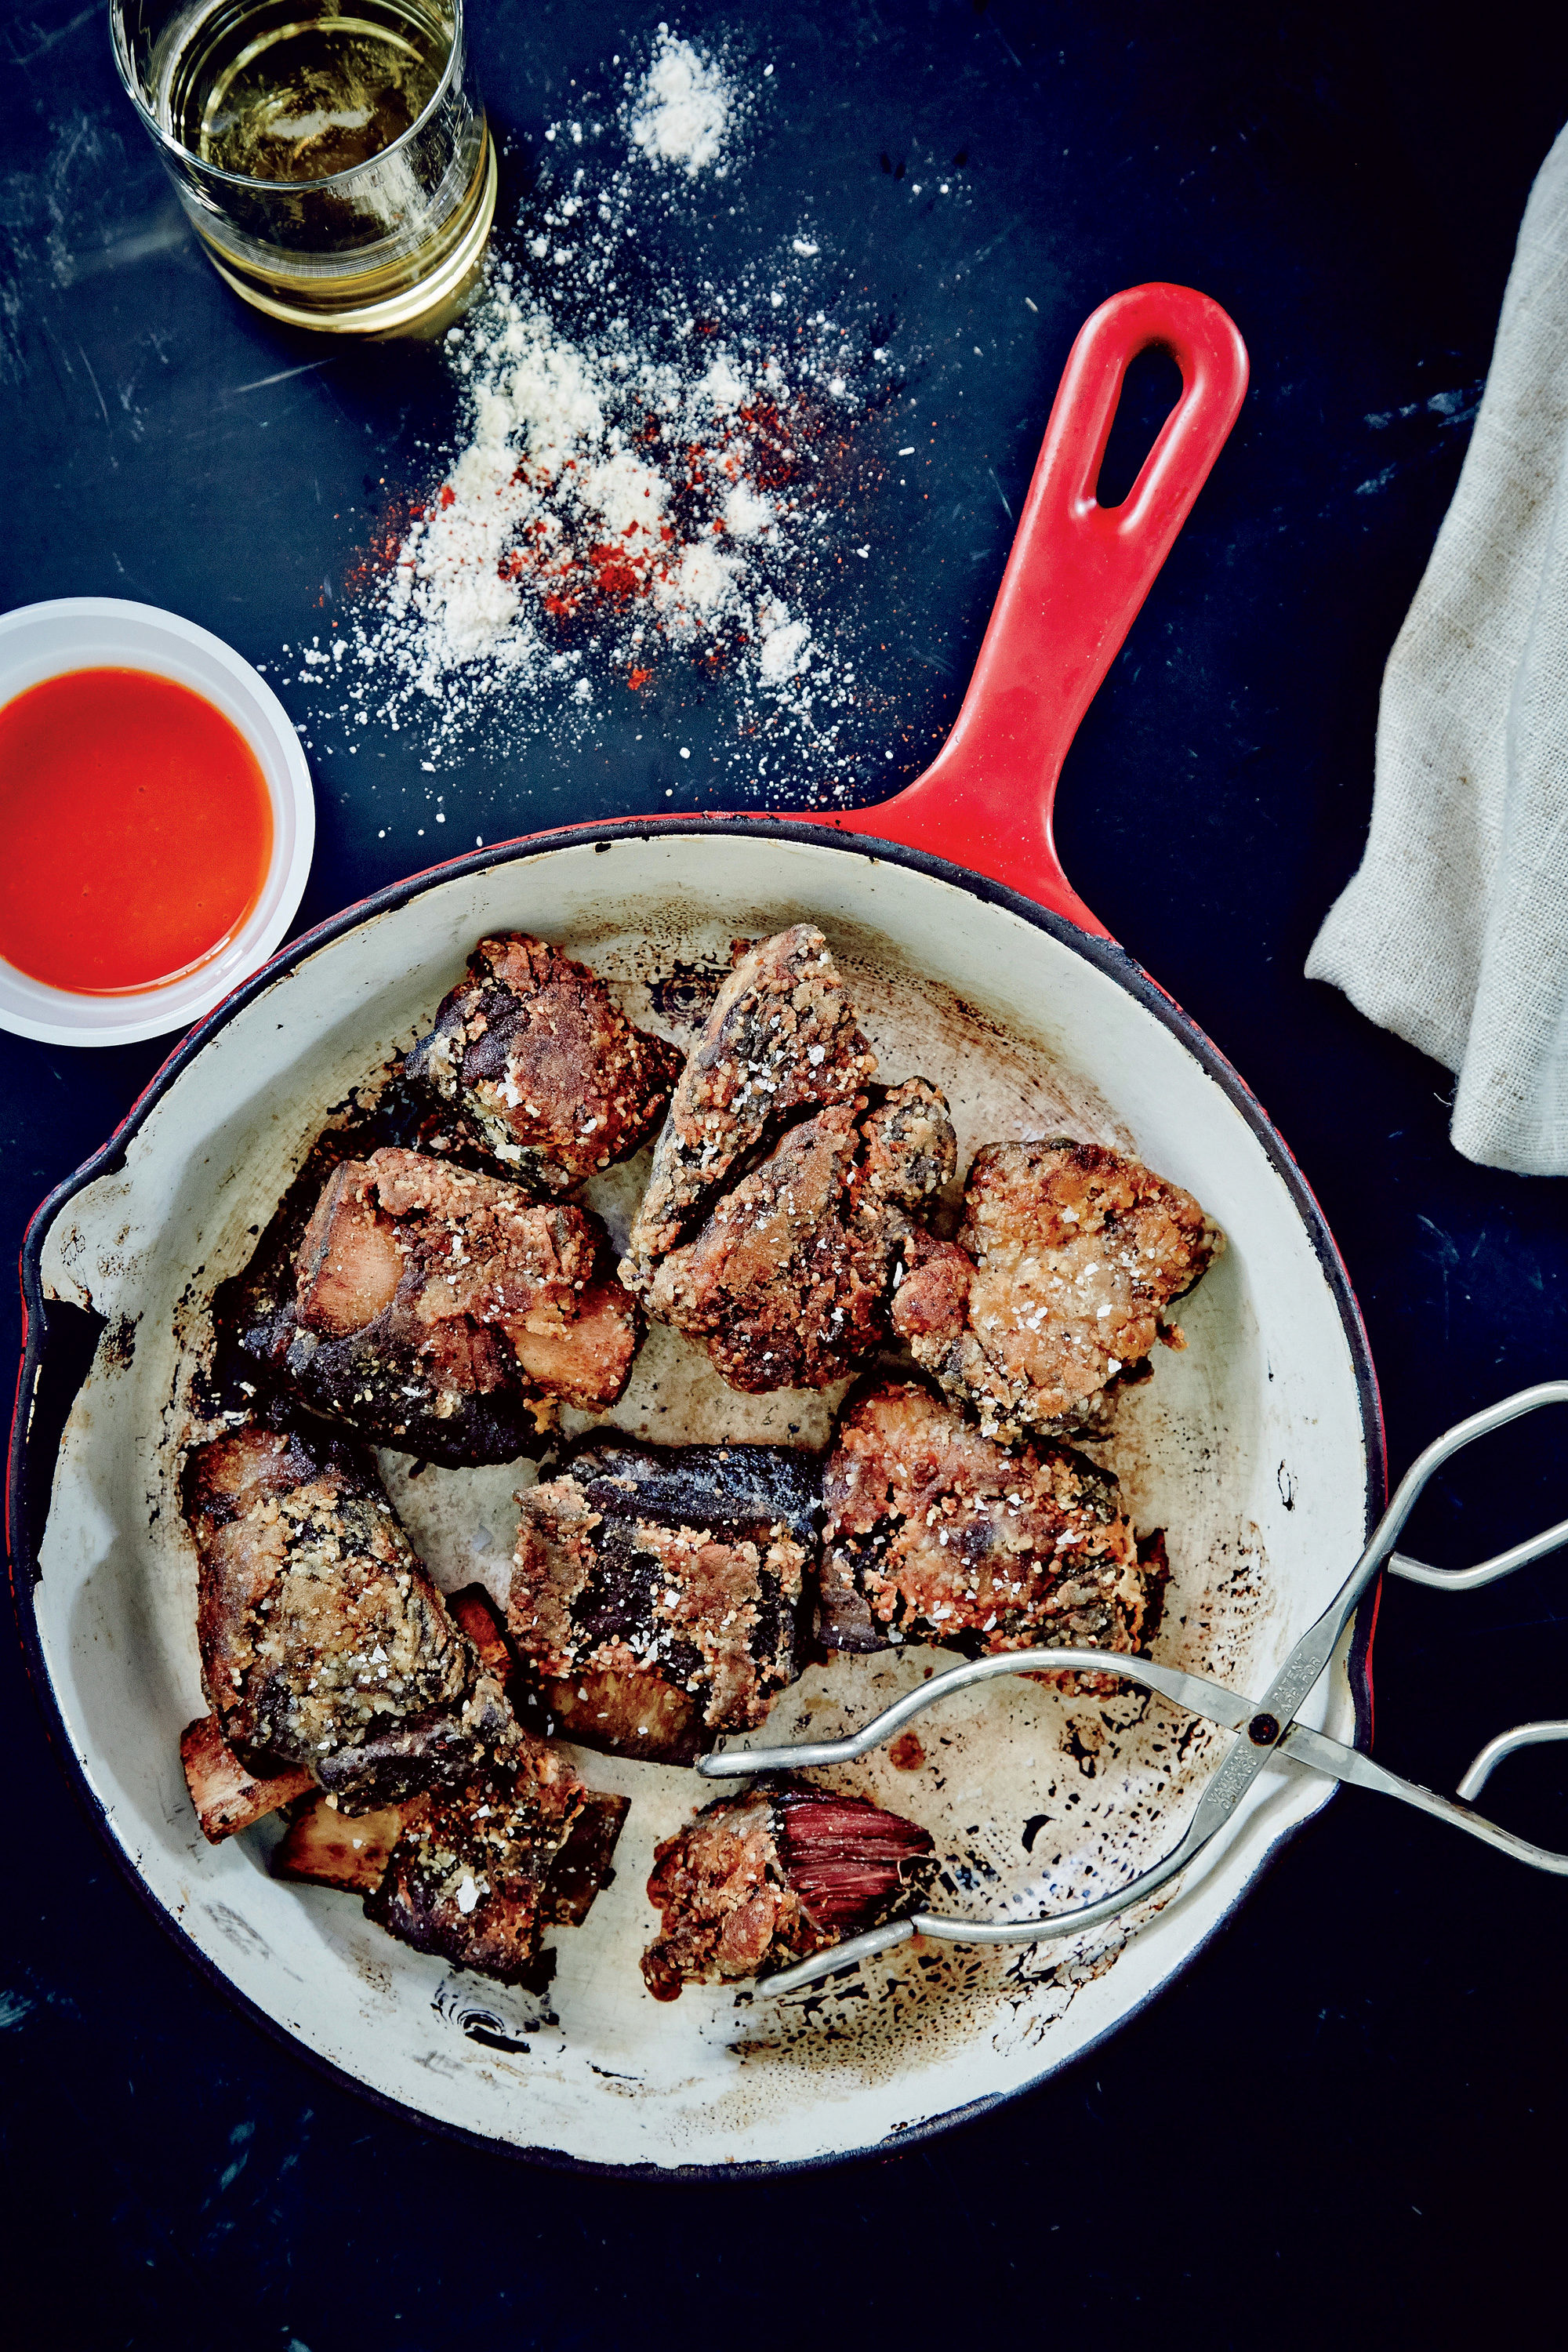 12 Seasoned Cast Iron Skillet with Ribs and More